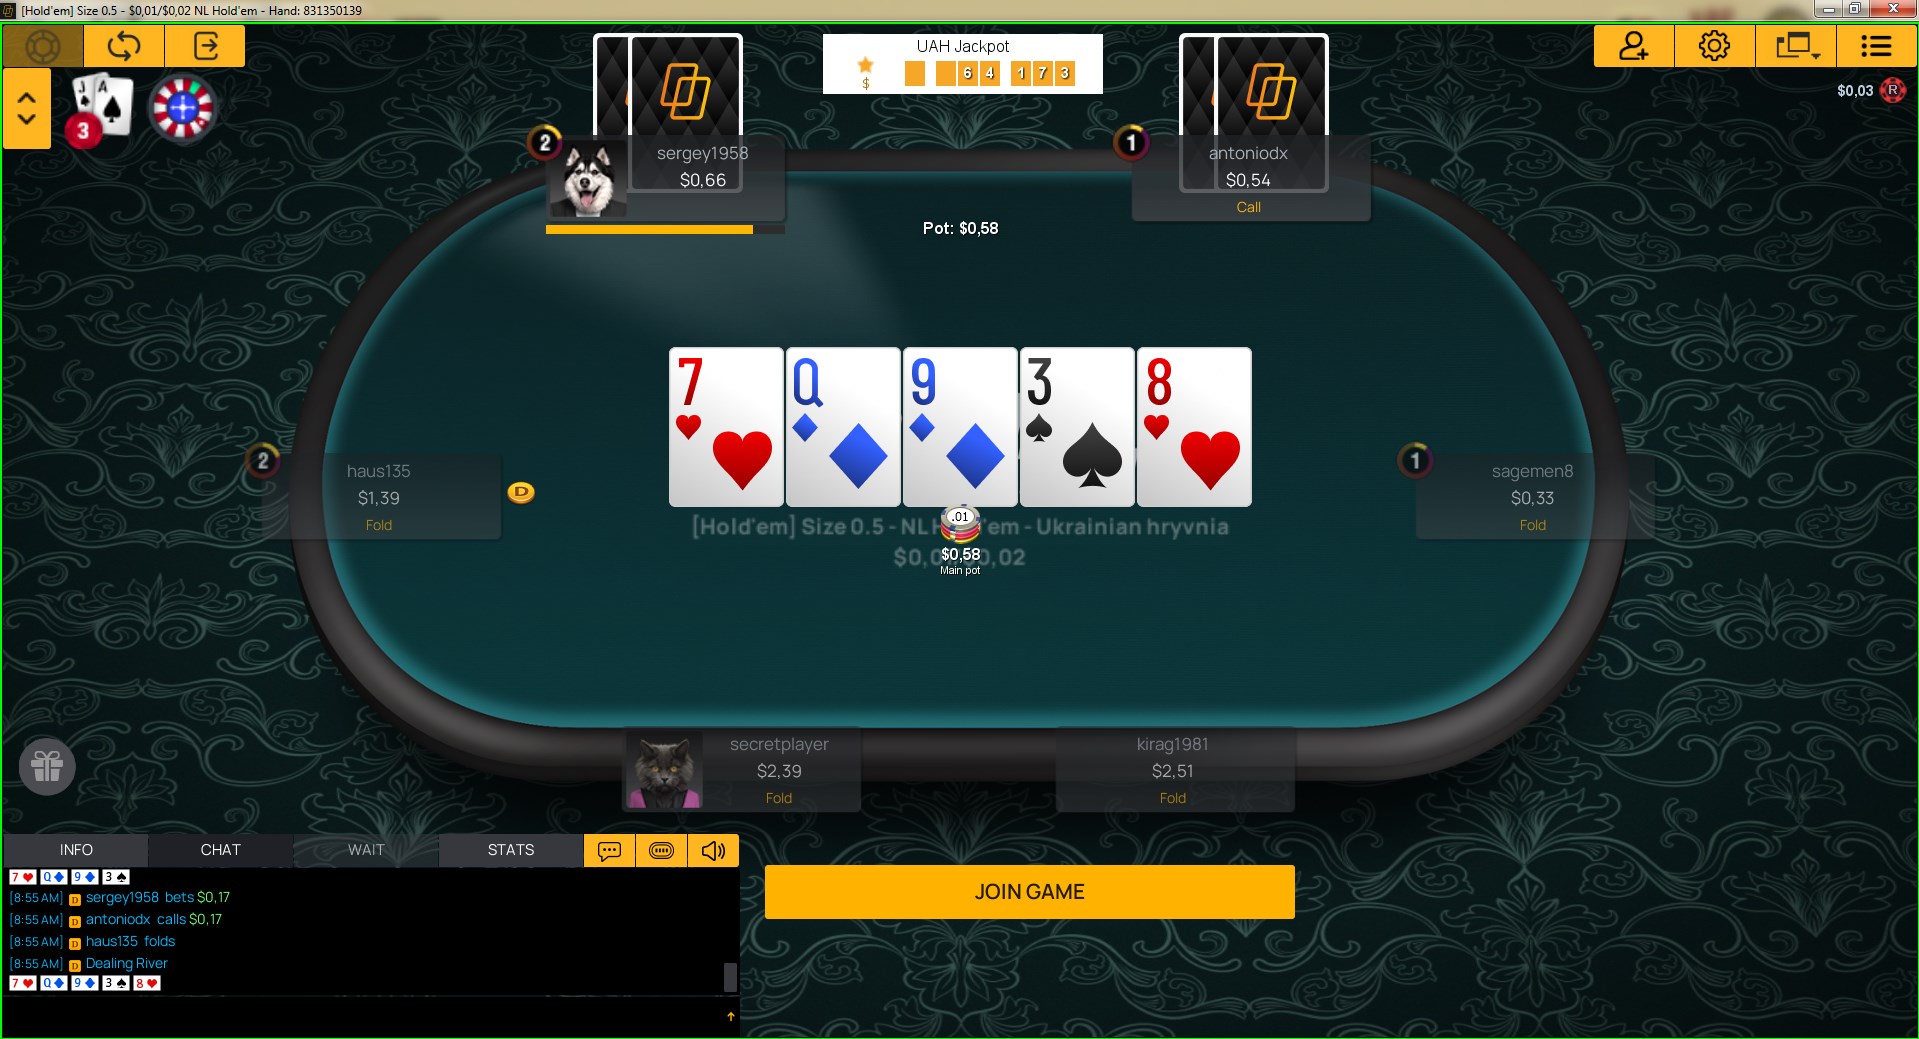 The pokermatch boost is filled only at micro stakes.